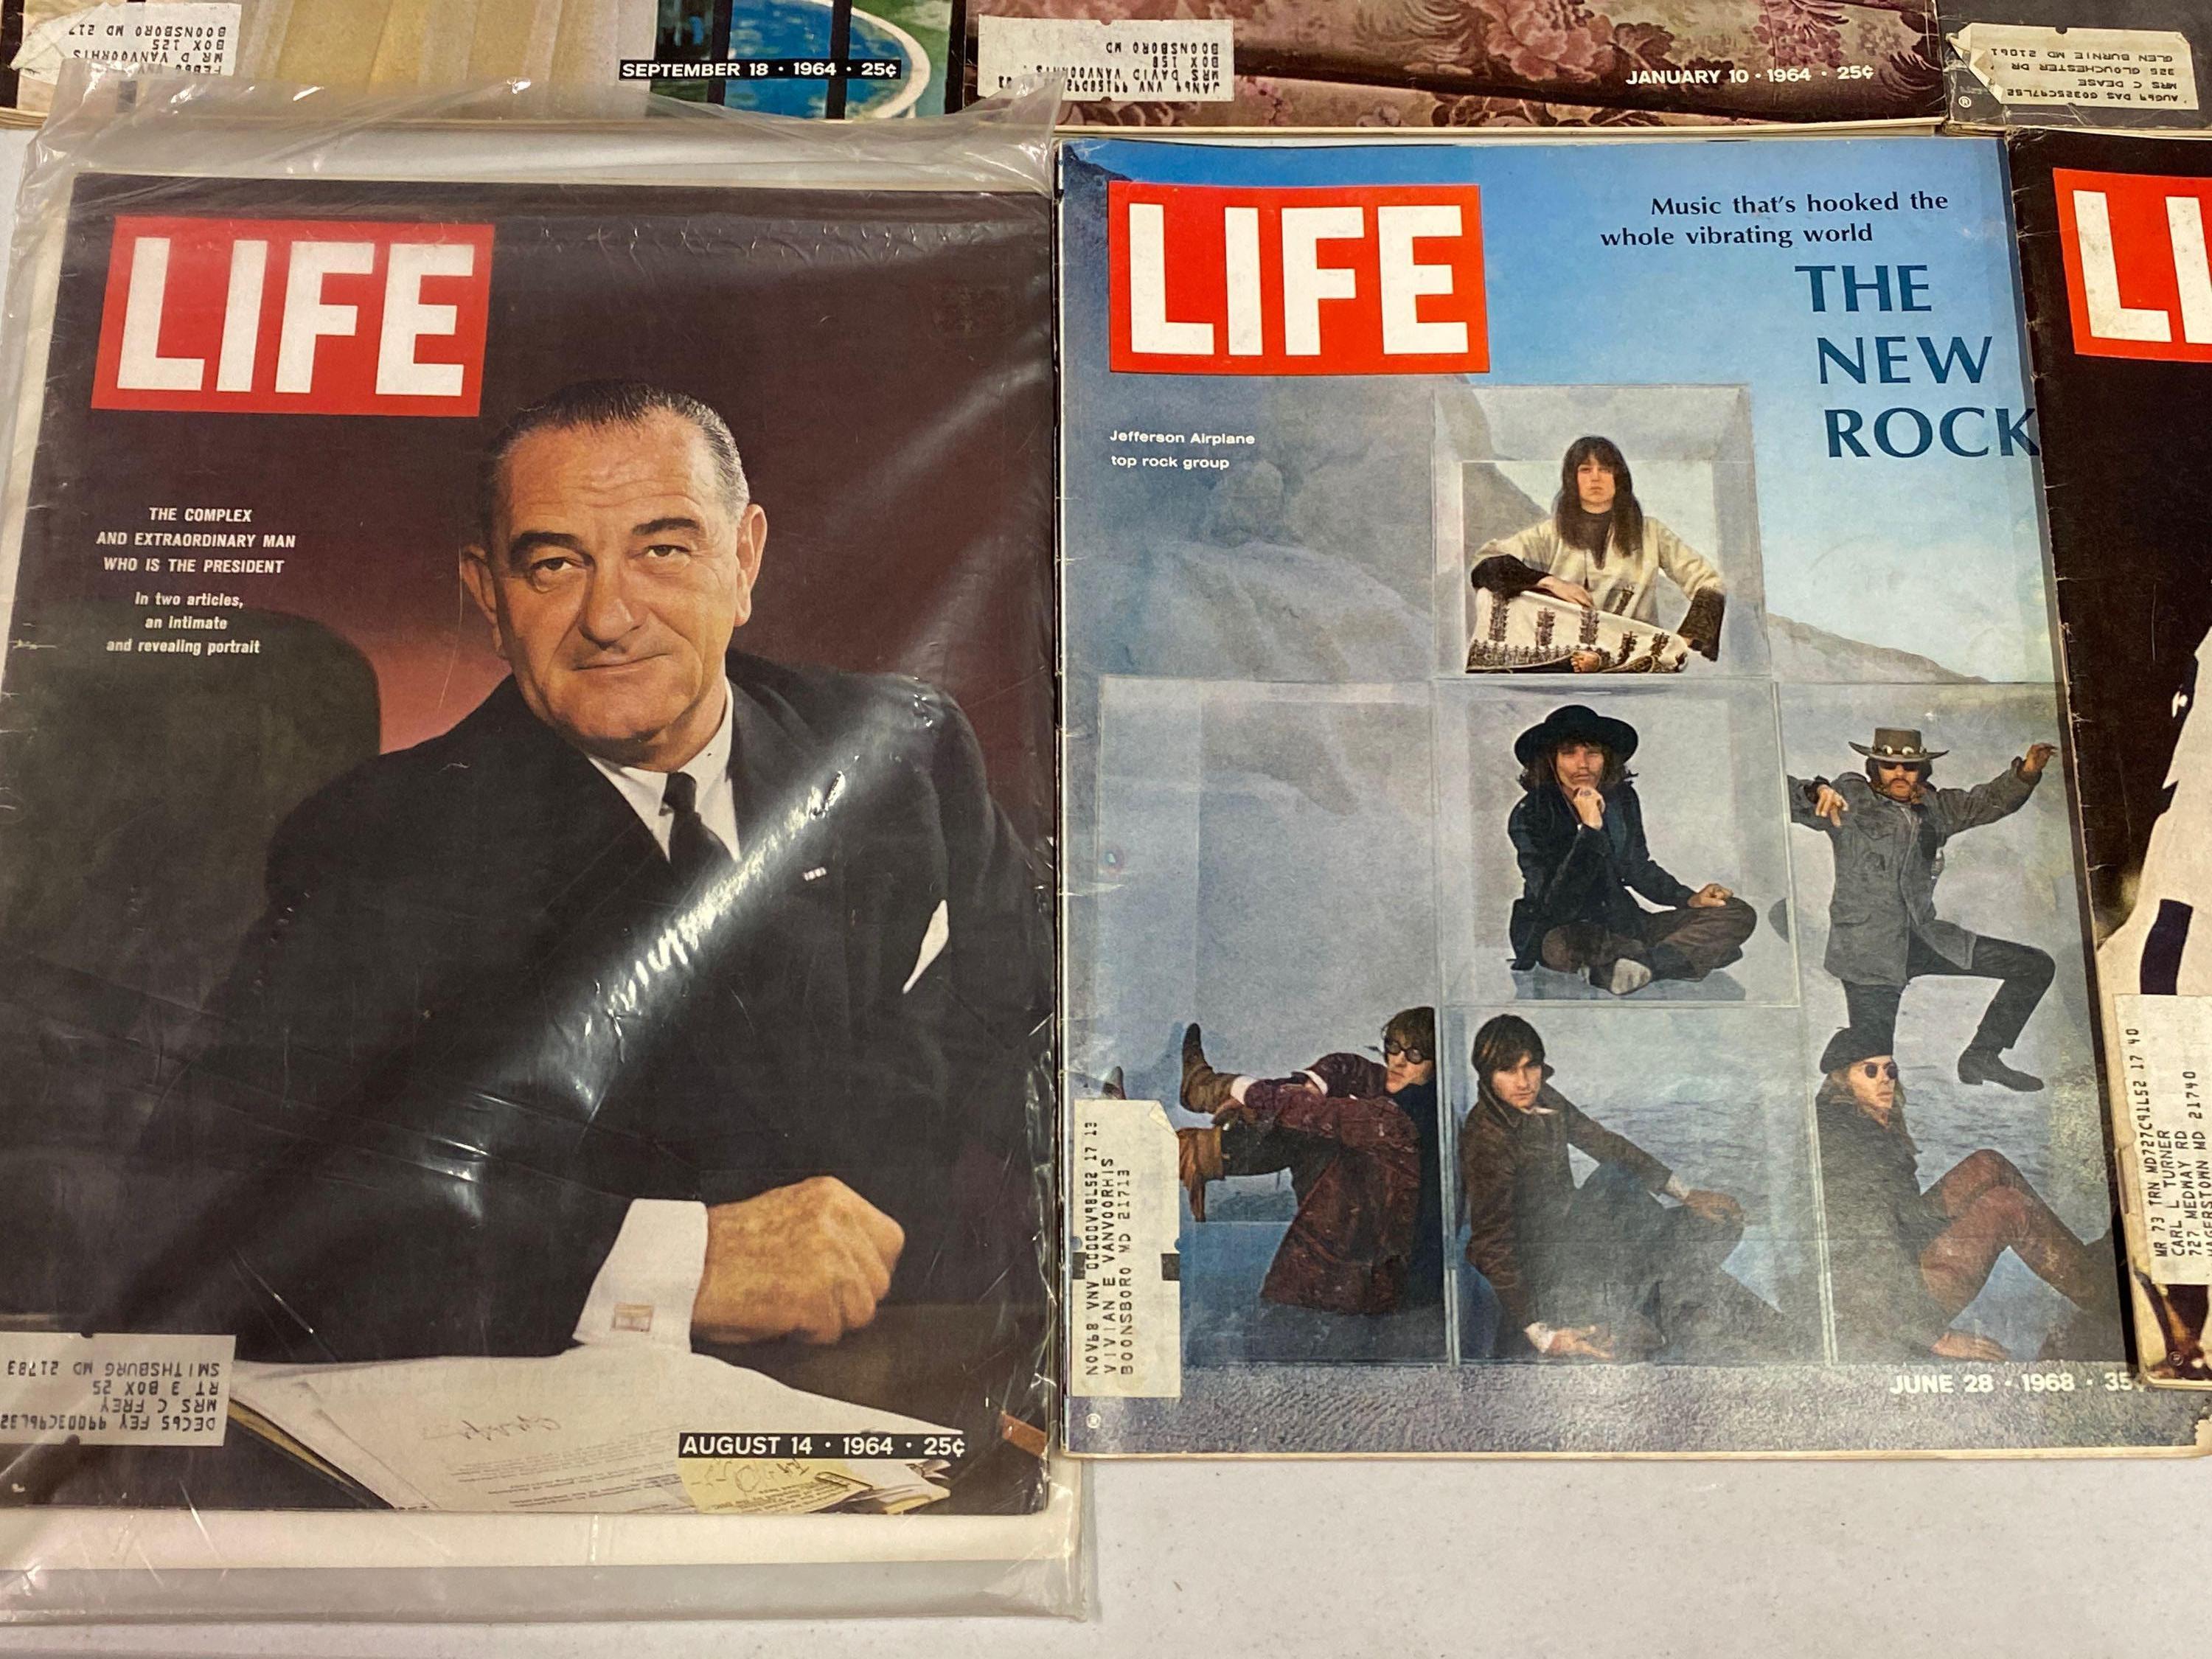 9 Issues of Life Magazine, 1960's & 1970's